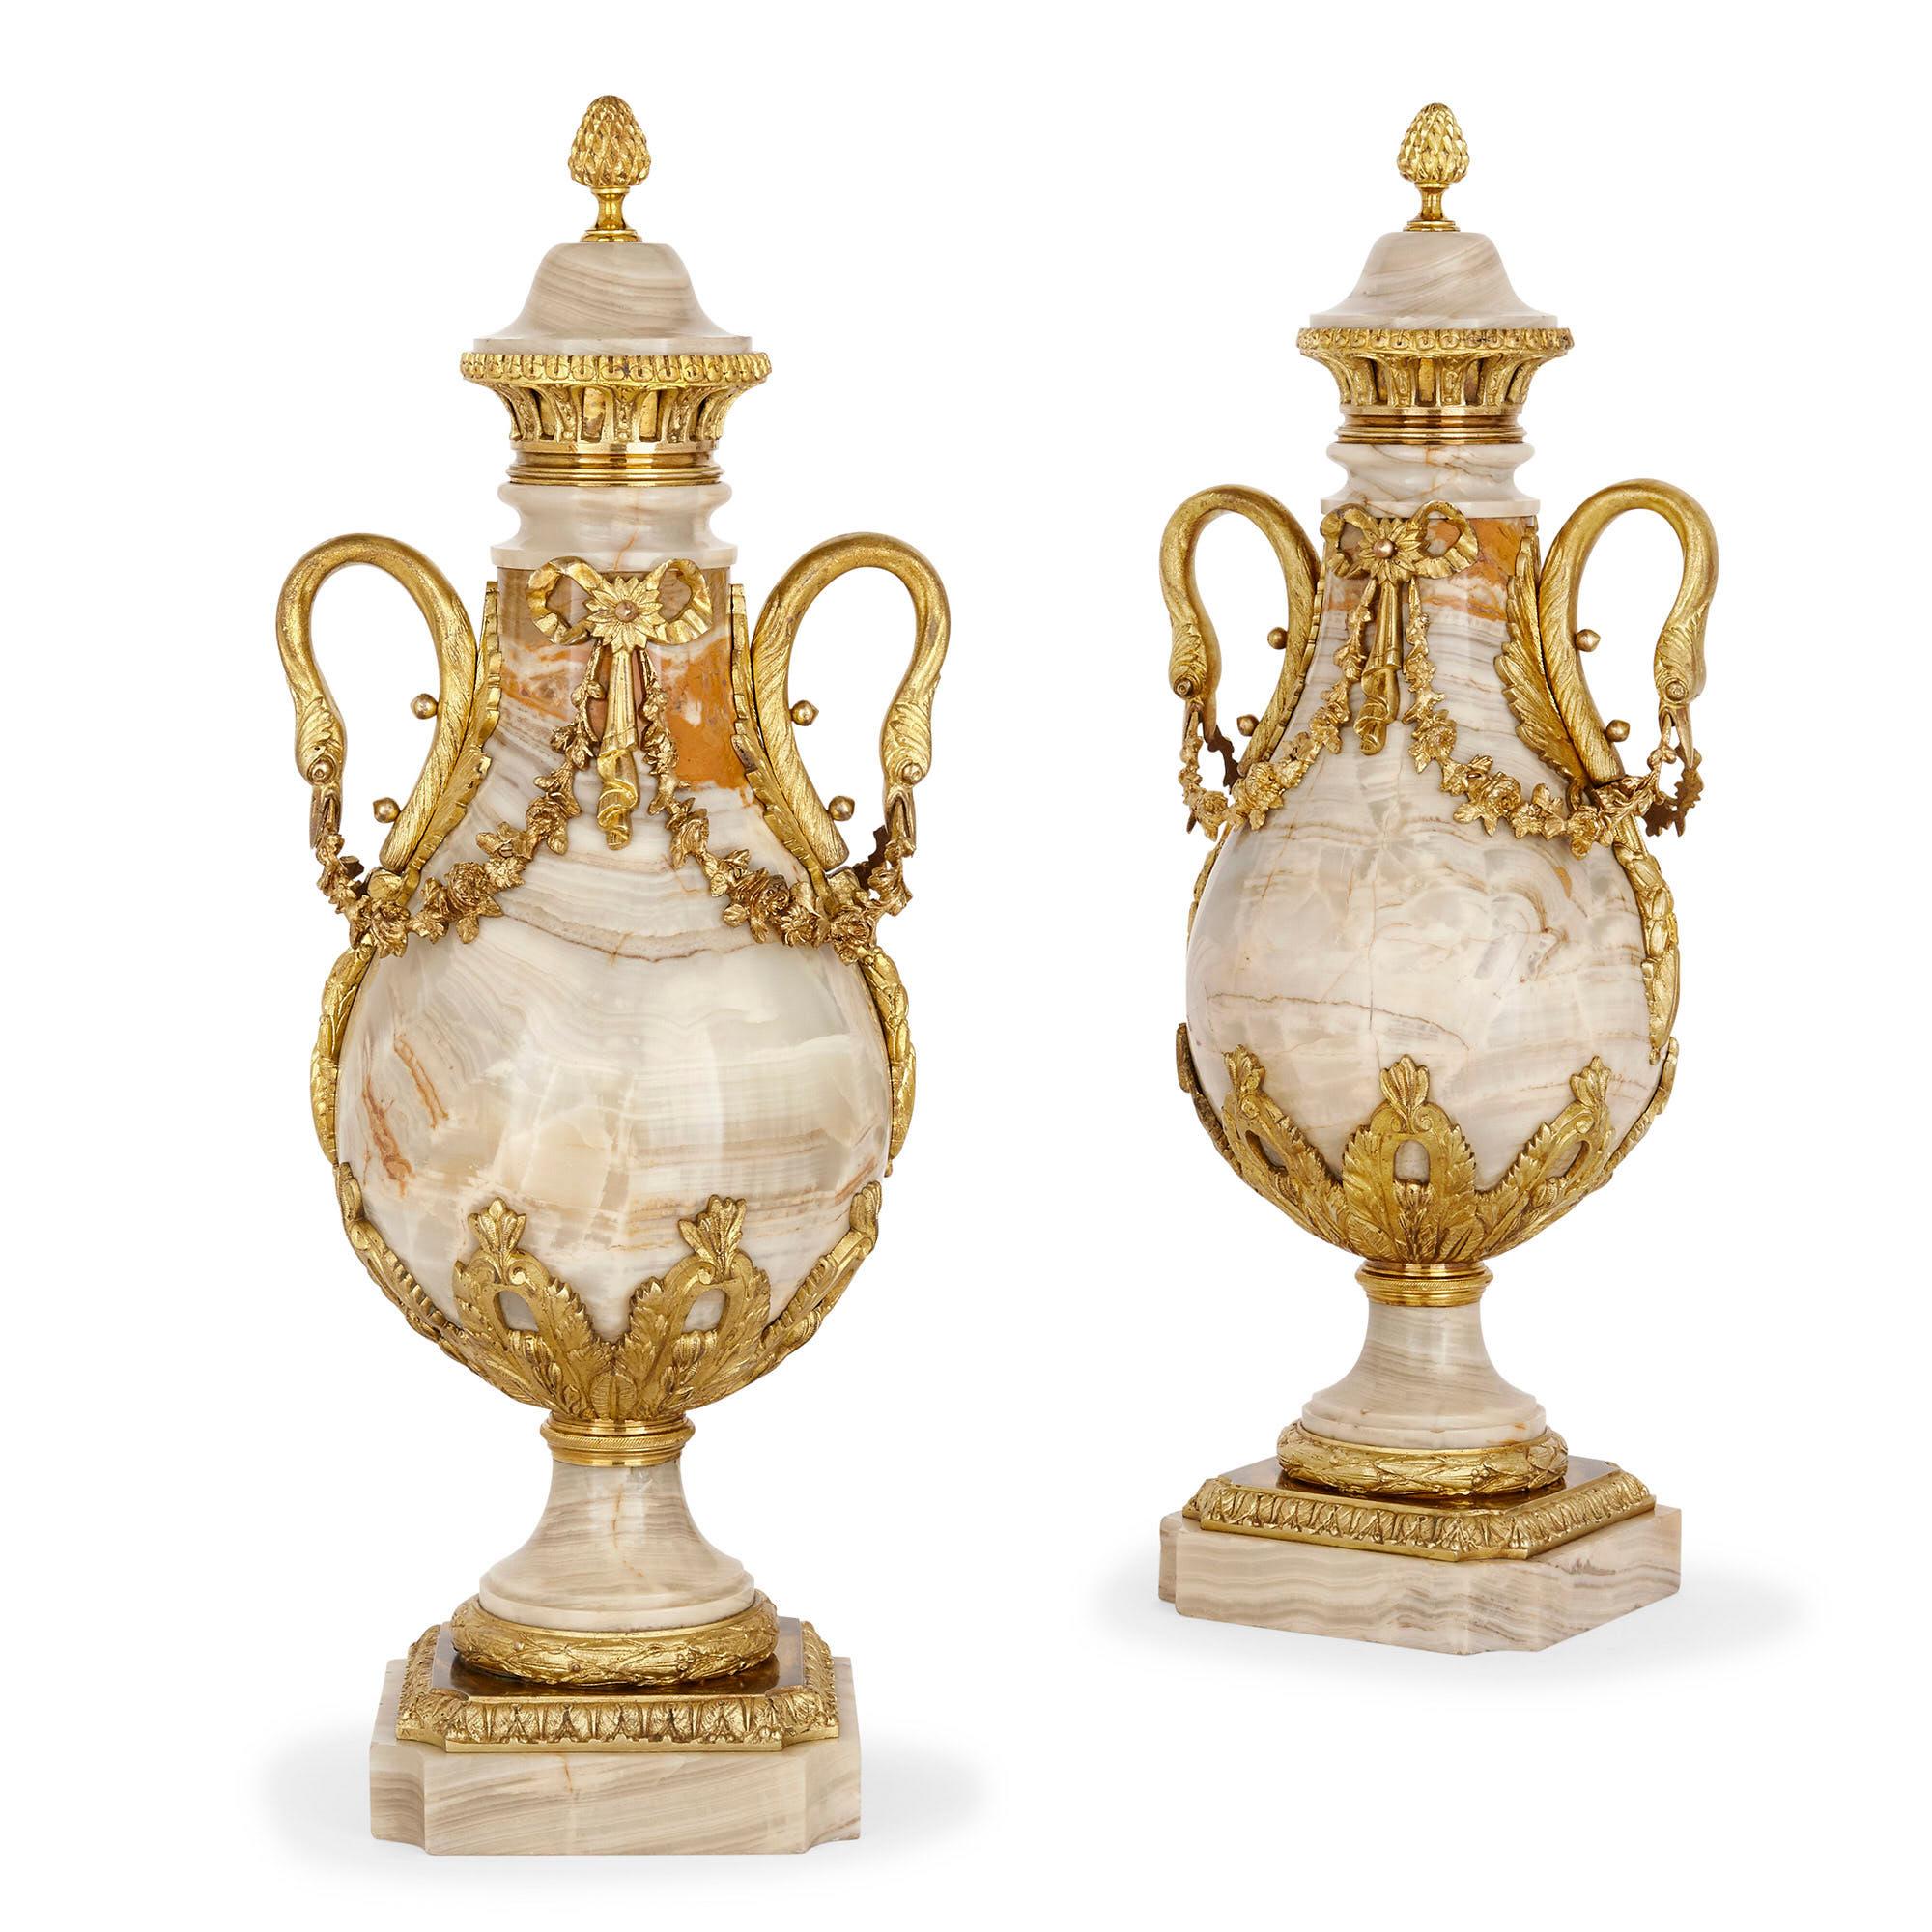 Each vase in this pair, crafted from gilt bronze mounted onyx, is baluster shaped in a manner characteristic of the grand and elegant neoclassical style. Supported by a square onyx base, each vase stands on a curvilinear gilt bronze mounted onyx